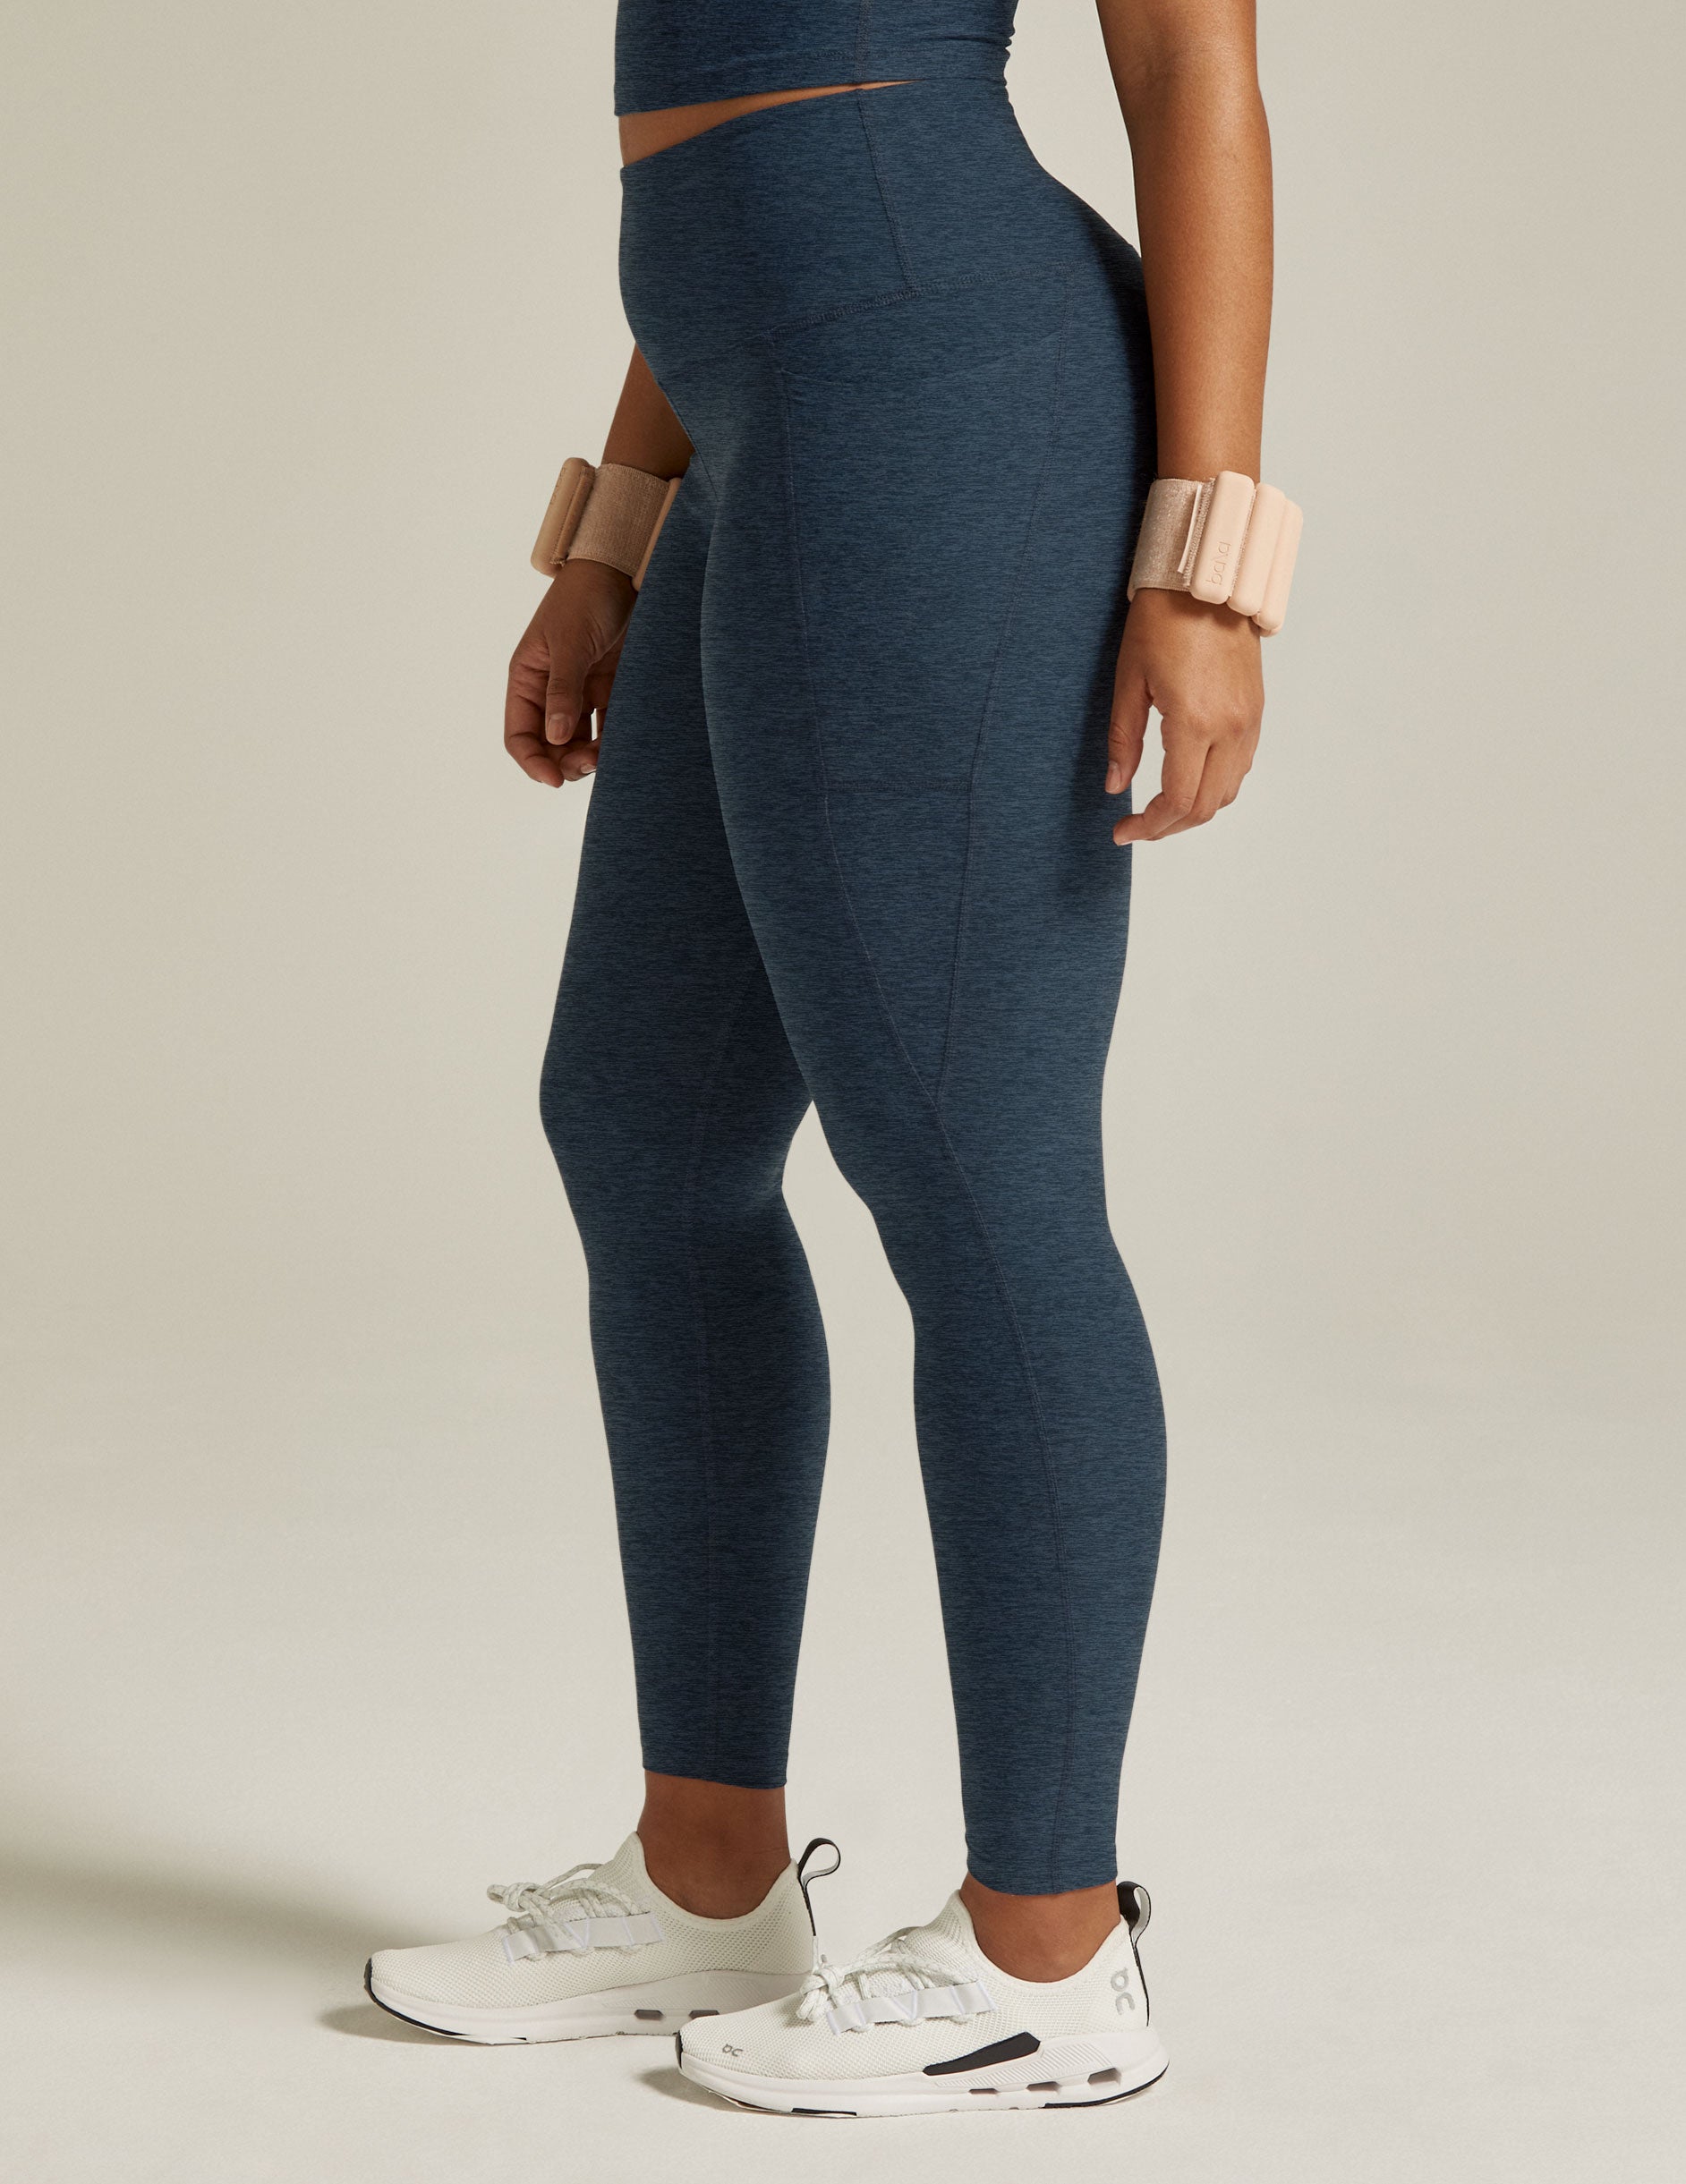 High-Waisted Cold Weather Pocket Legging in Navy Blue